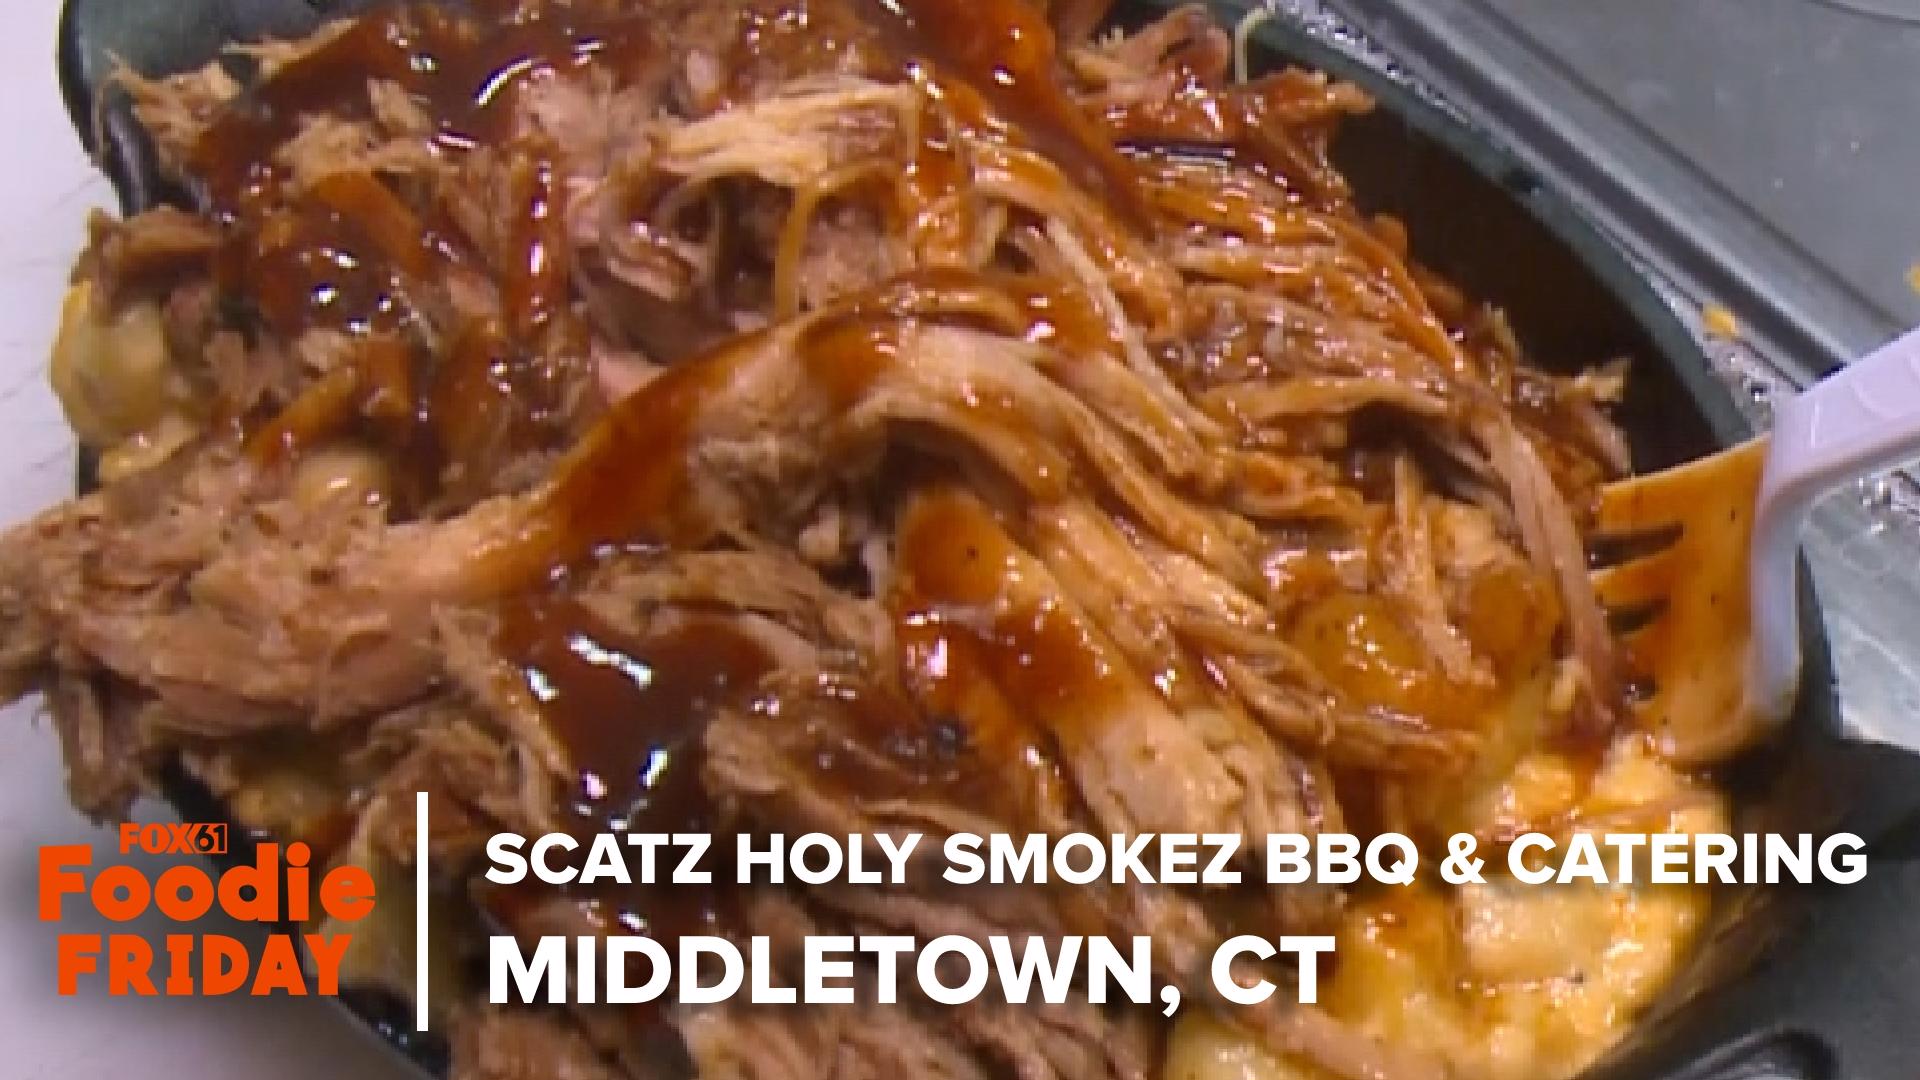 Hot 93.7's Jenny Boom Boom visited Scatz Holy Smokez BBQ & Catering in Middletown for FOX61's Foodie Friday.